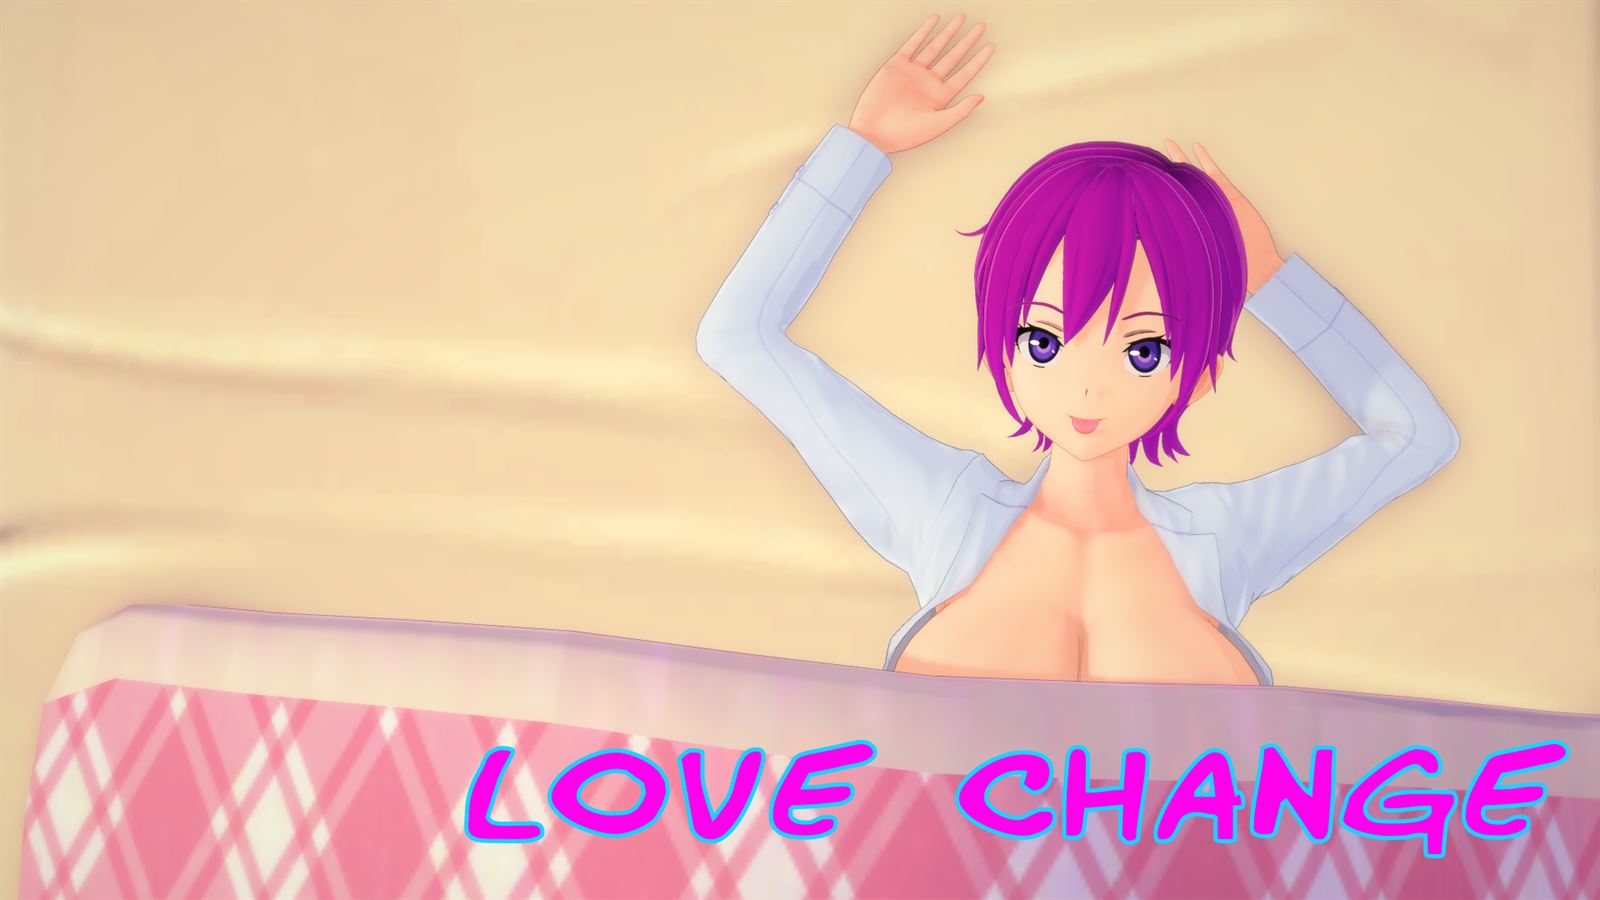 Xxx Hd Chabe - Love Change Ren'py Porn Sex Game v.1.0c Download for Windows, MacOS, Linux,  Android